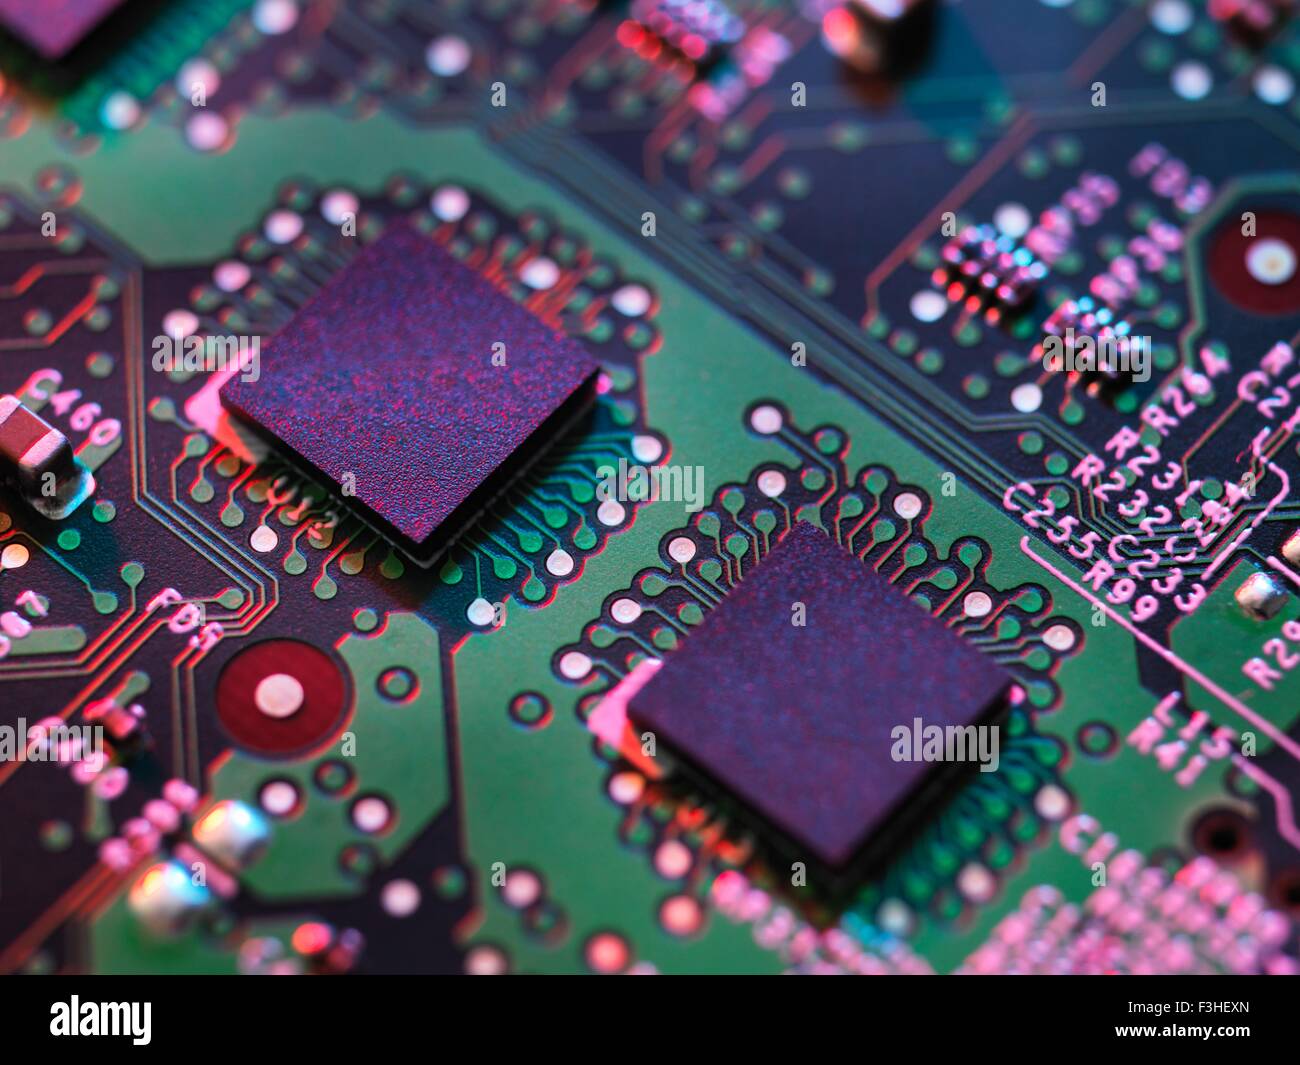 Close up detail of purple and green computer circuit board Stock Photo